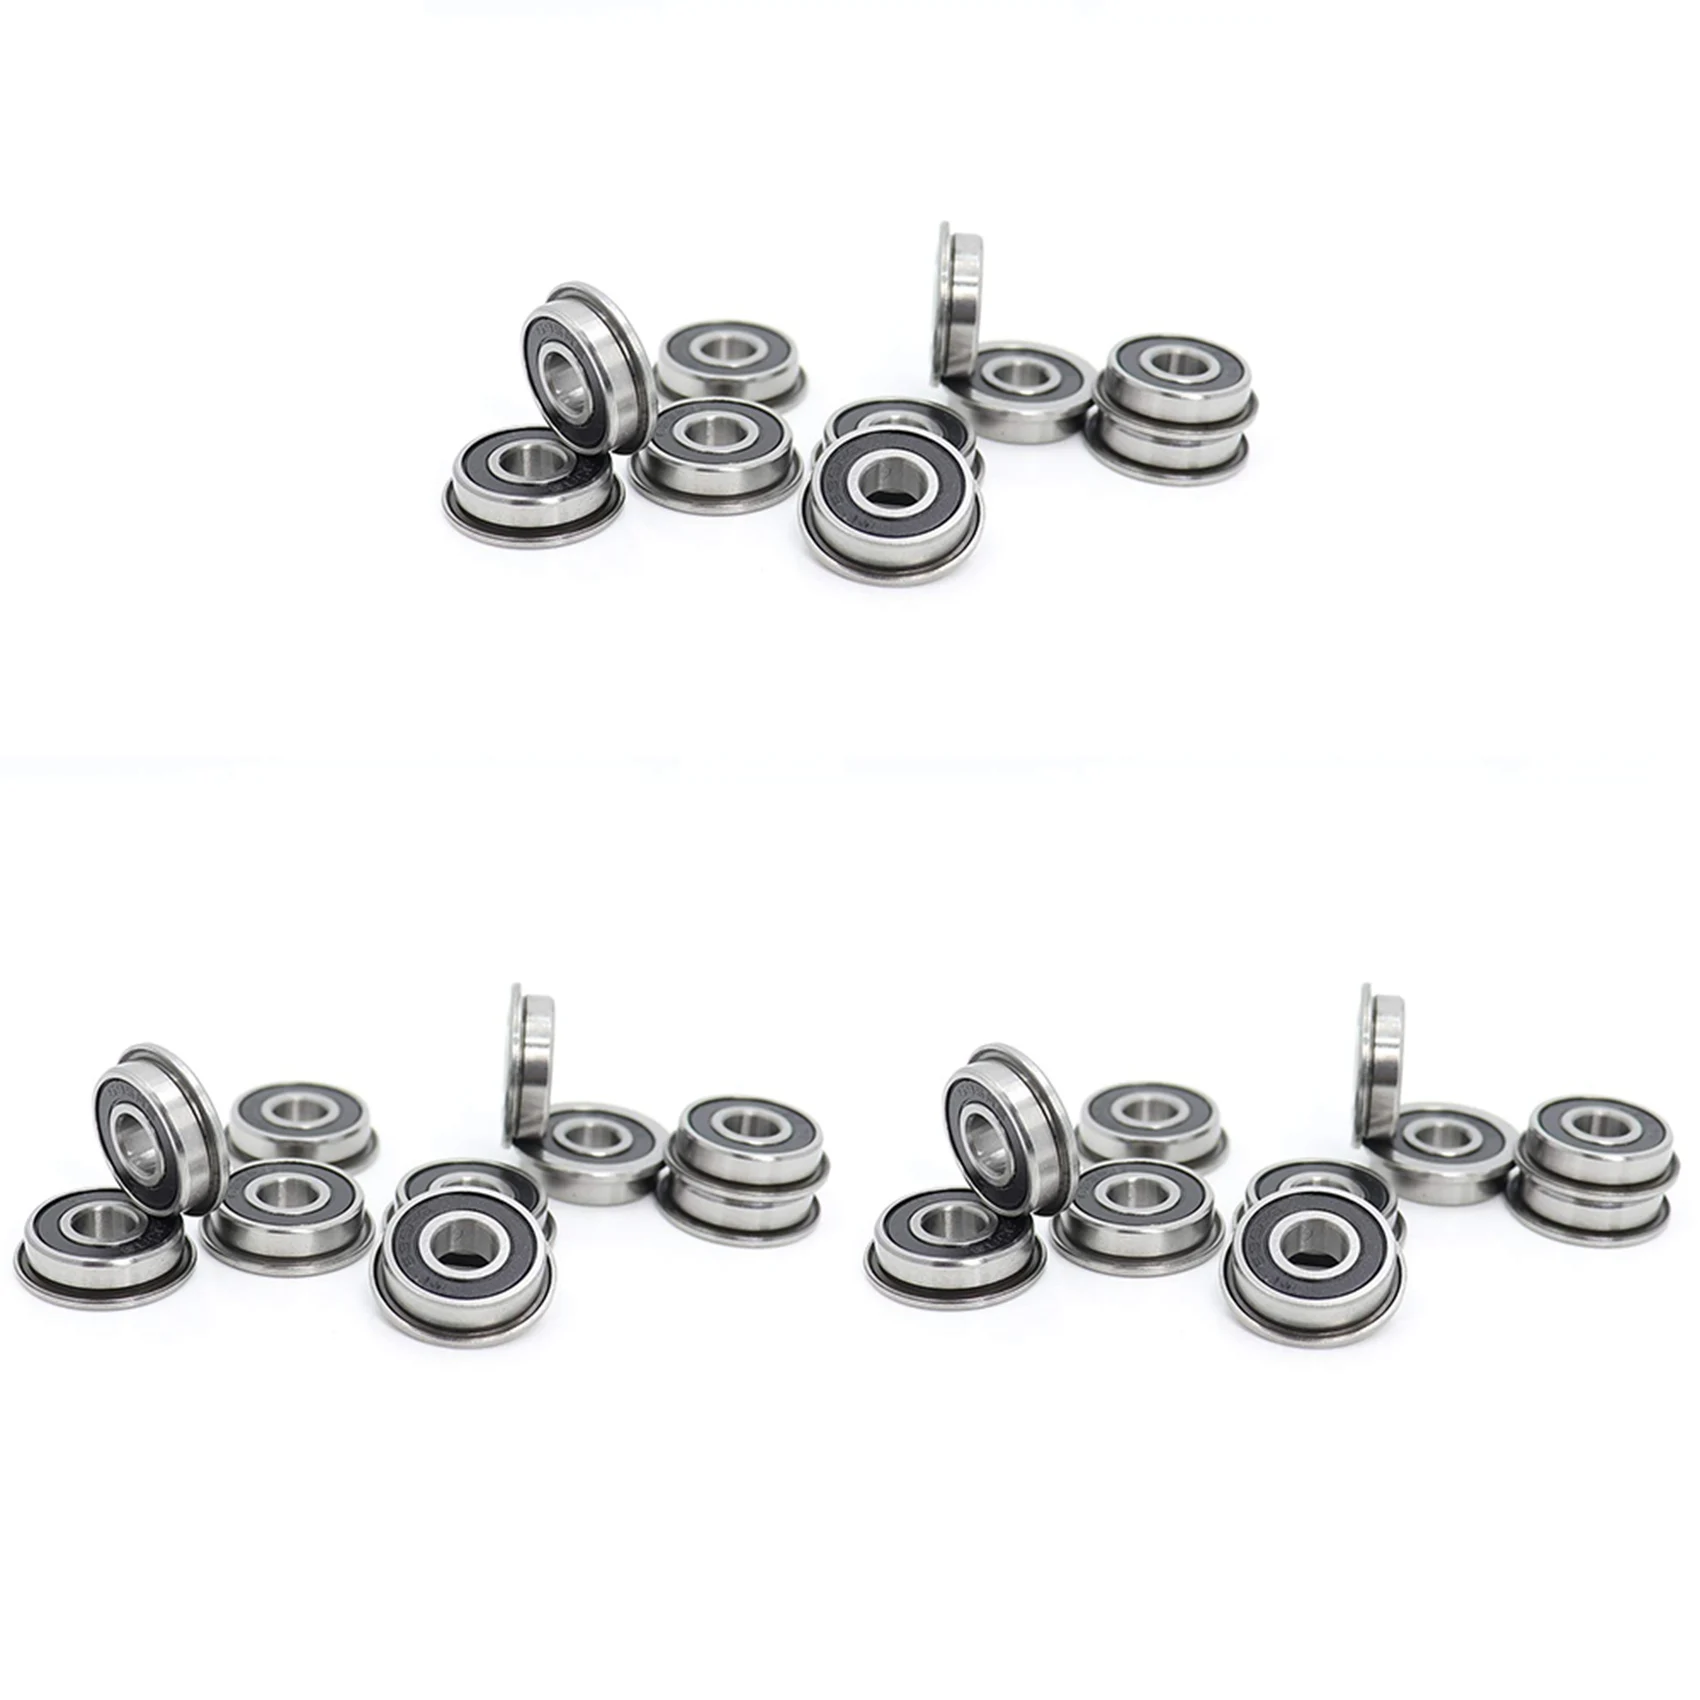 

40Pcs F695-2RS Bearing 5X13X4mm Flanged Miniature Deep Groove Ball Bearings F695RS for VORON Mobius 2/3 3D Printer